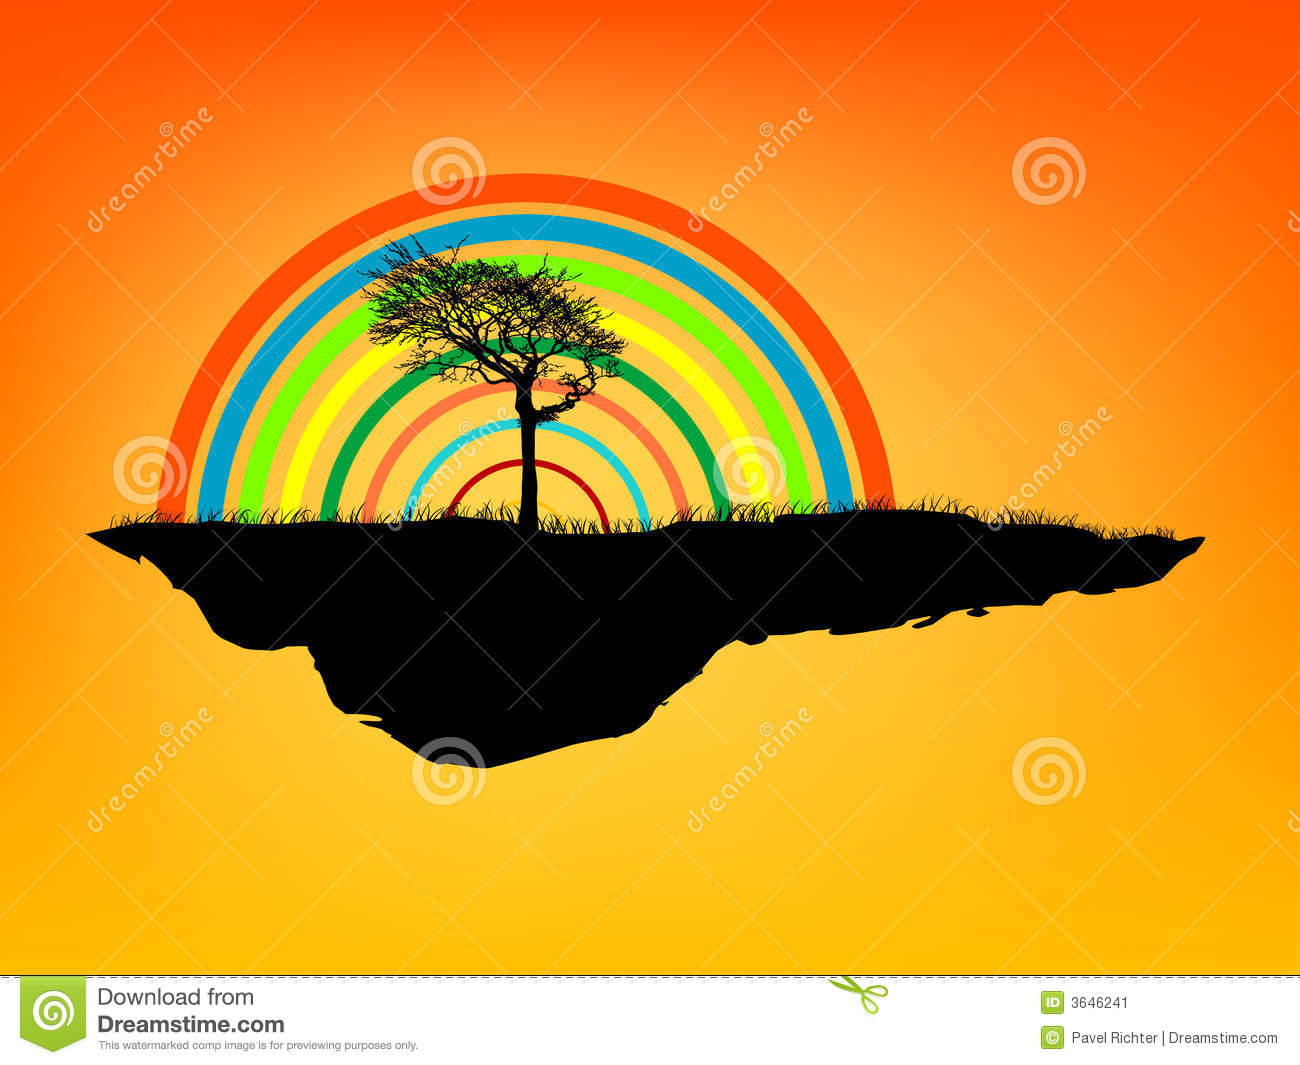 Floating Island with Tree